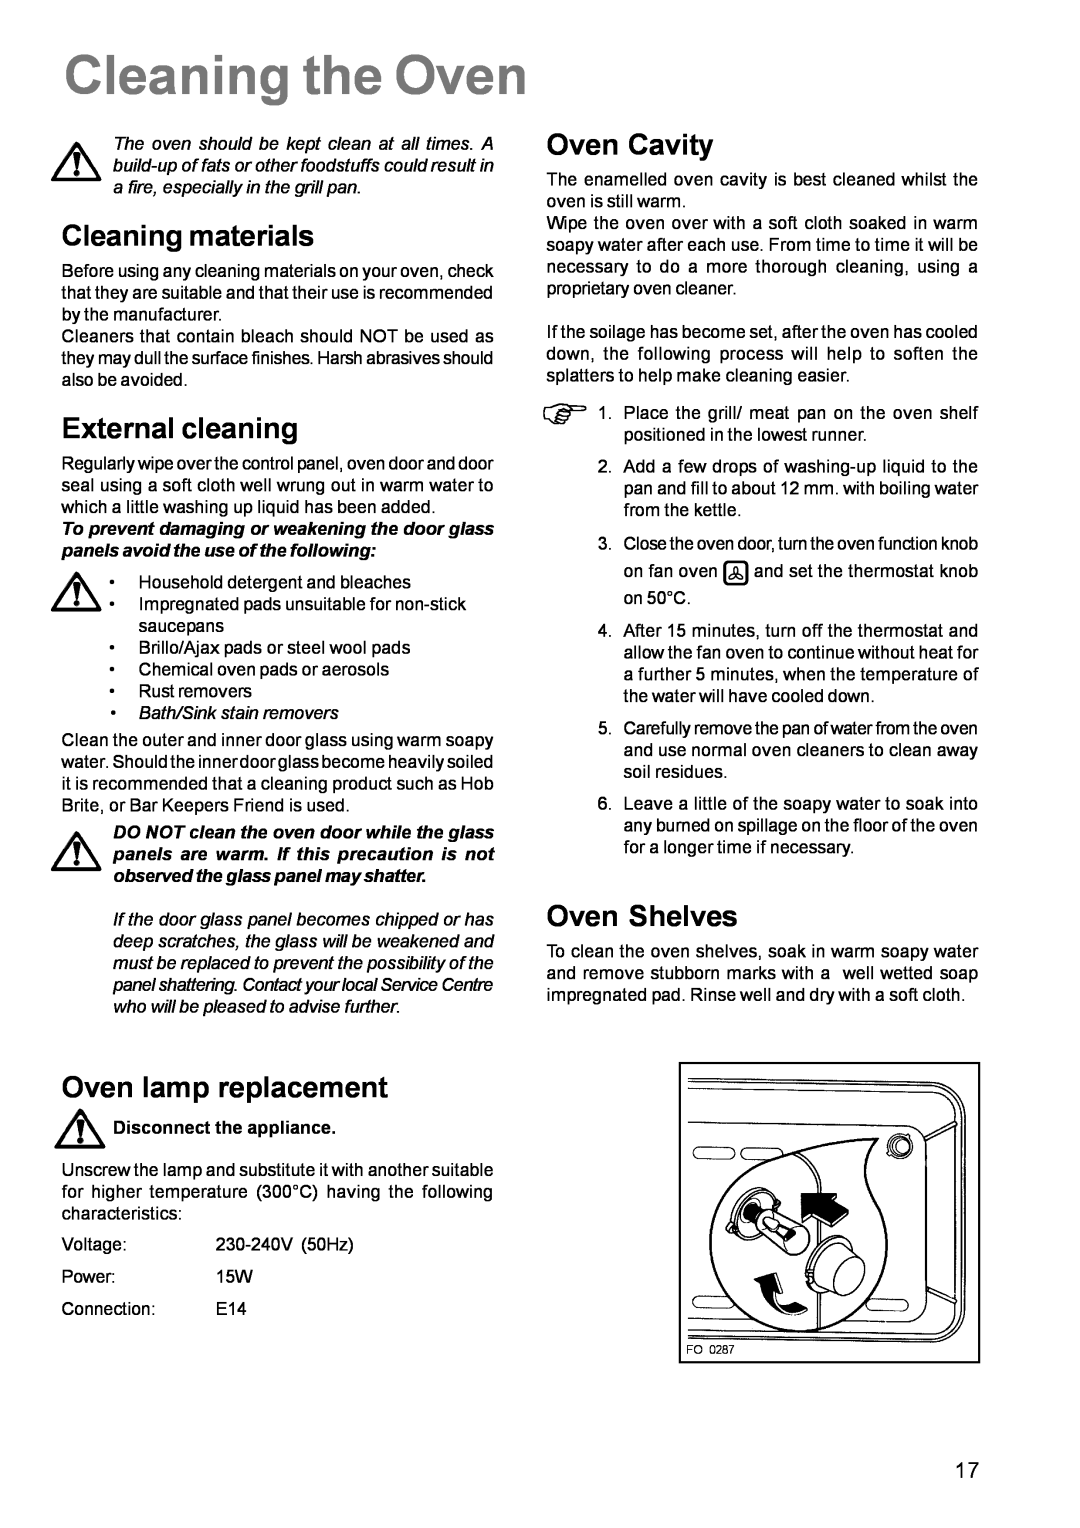 Zanussi ZCE 631 Cleaning the Oven, Cleaning materials, External cleaning, Oven Cavity, Oven Shelves, Oven lamp replacement 